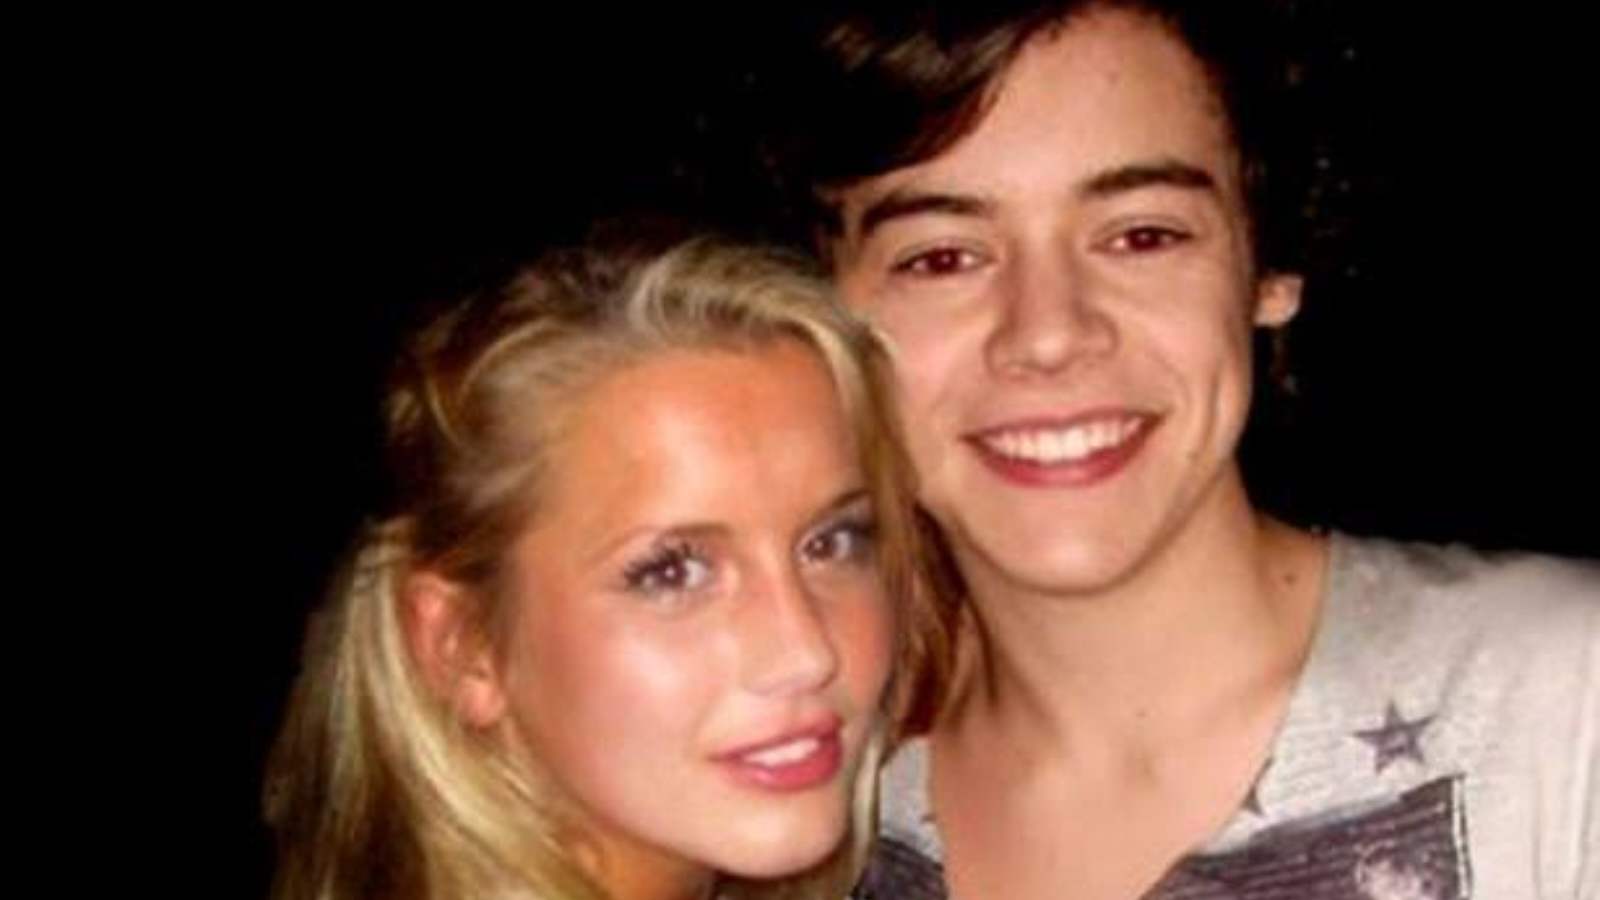 Harry Styles and Caggie Dunlop had a brief romance